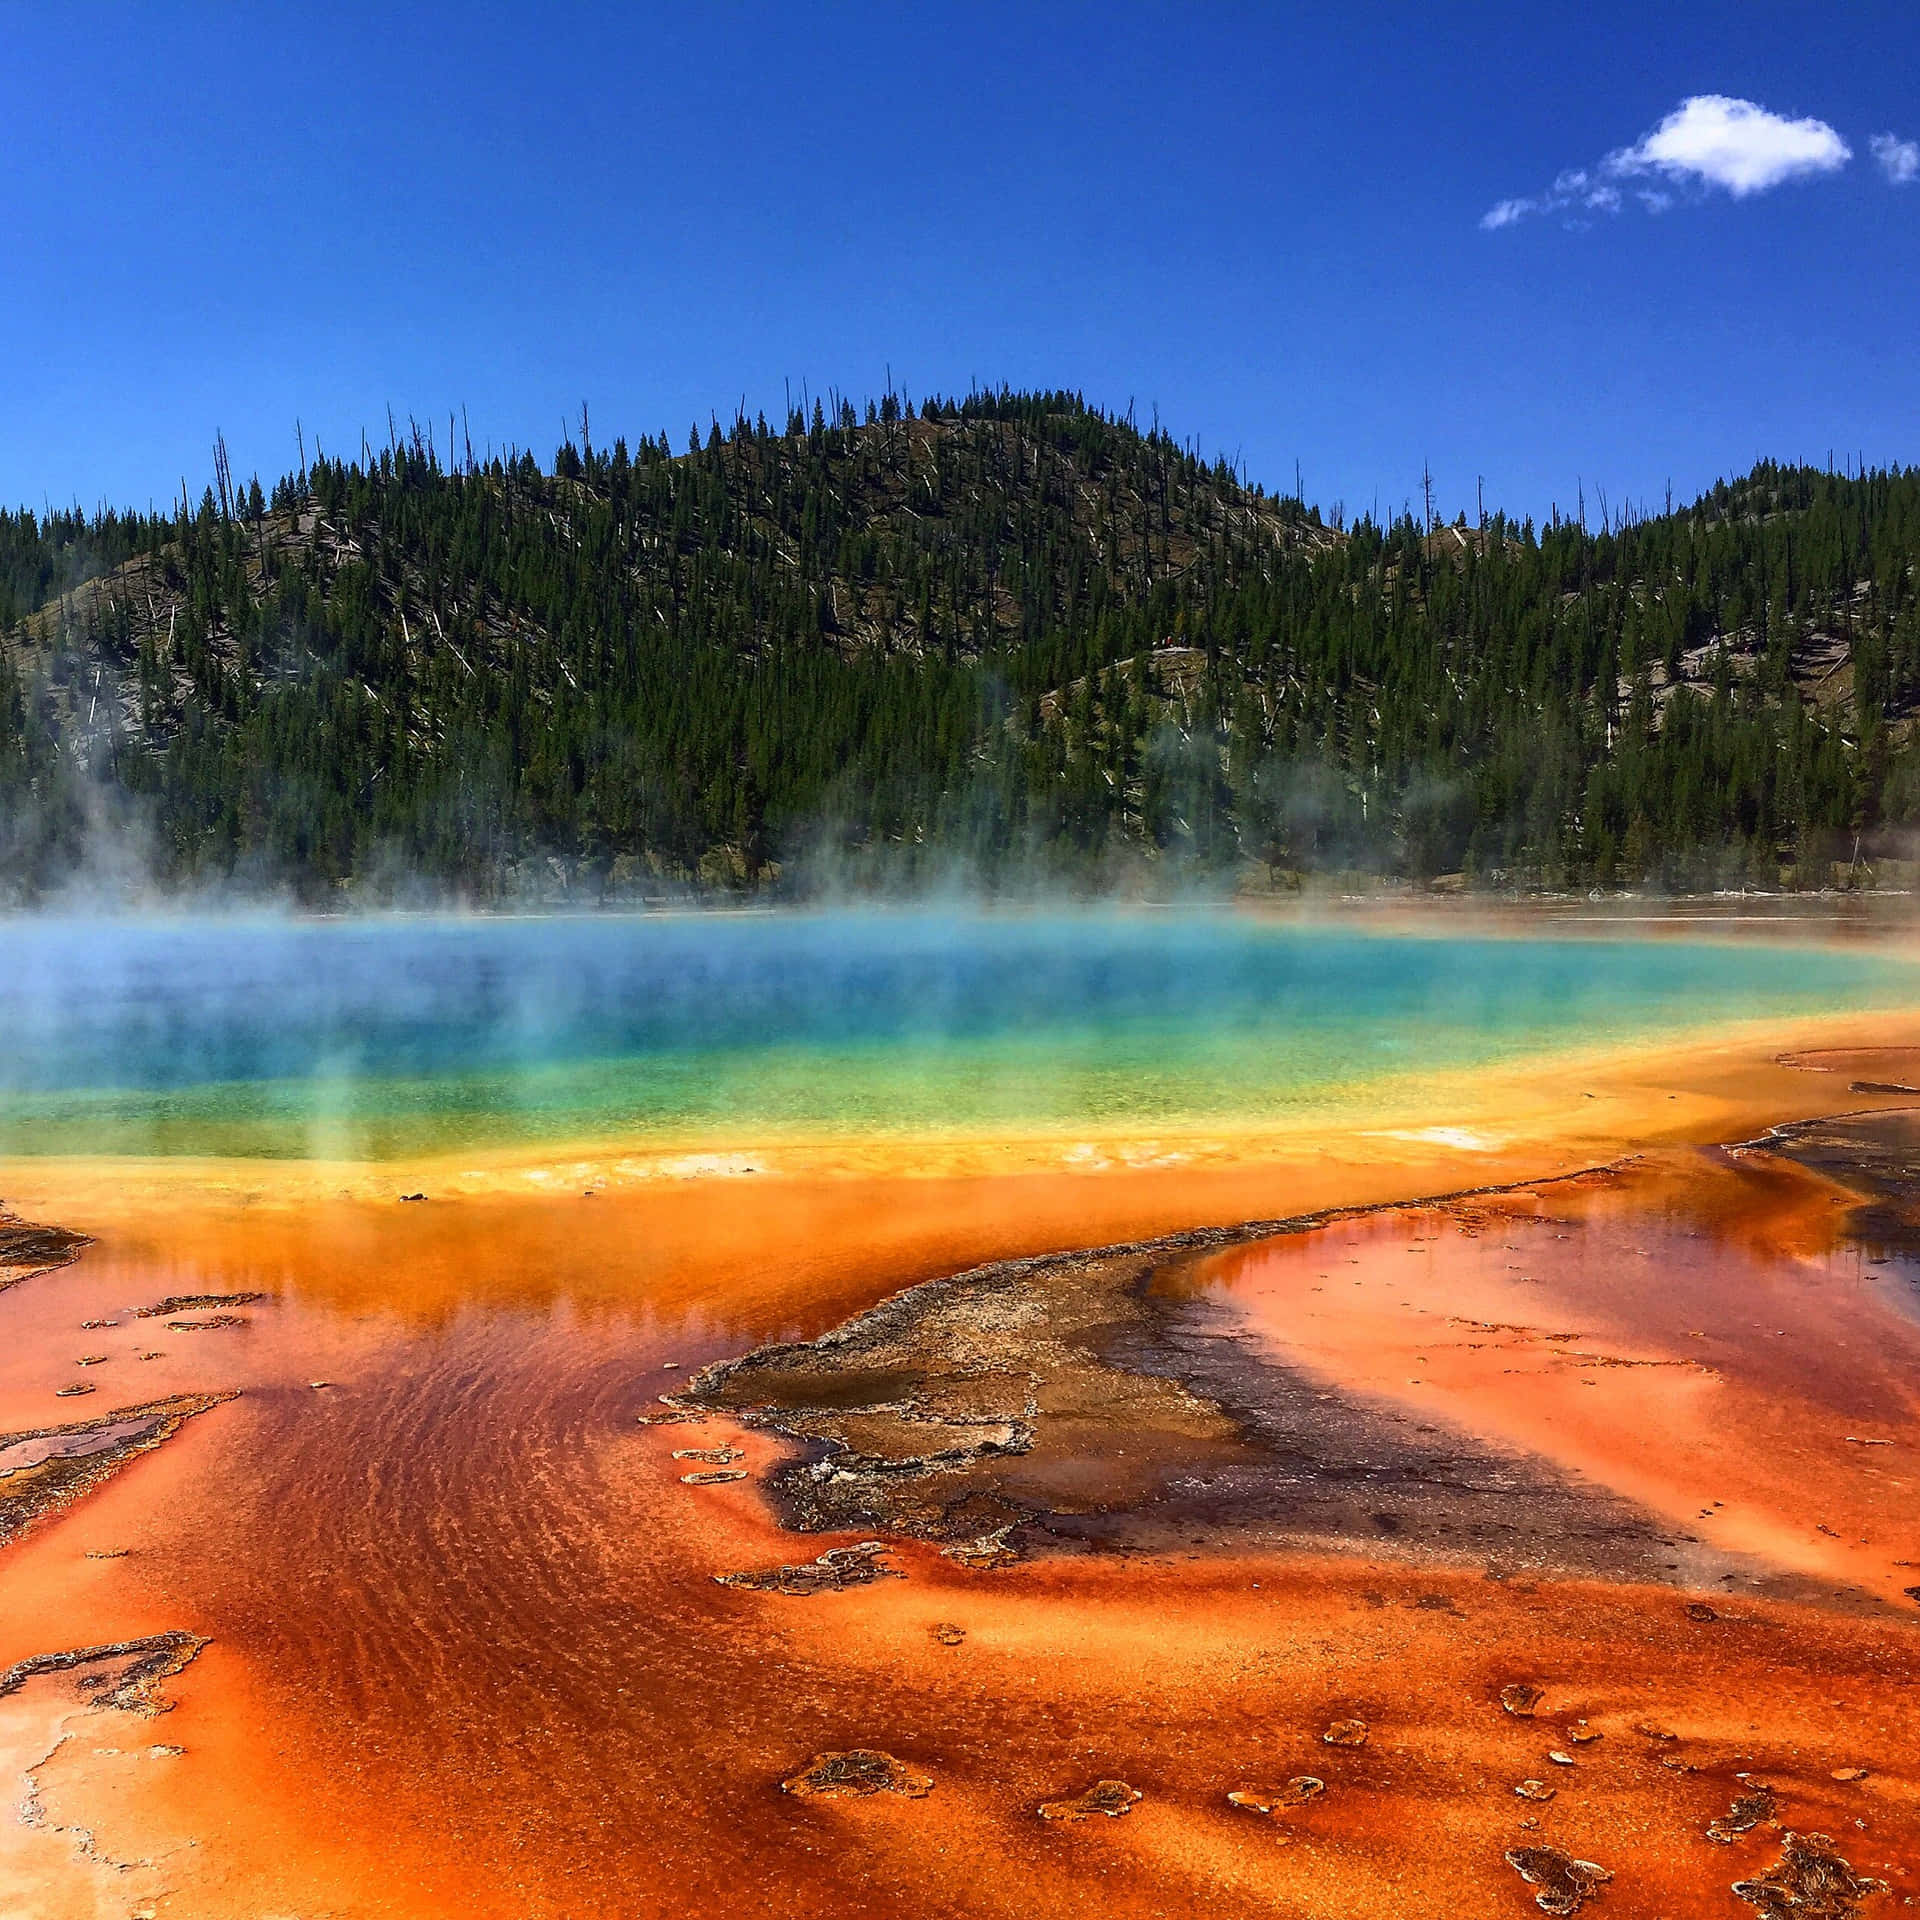 Download Marvel in the breathtaking views of Yellowstone National Park  Wallpaper 